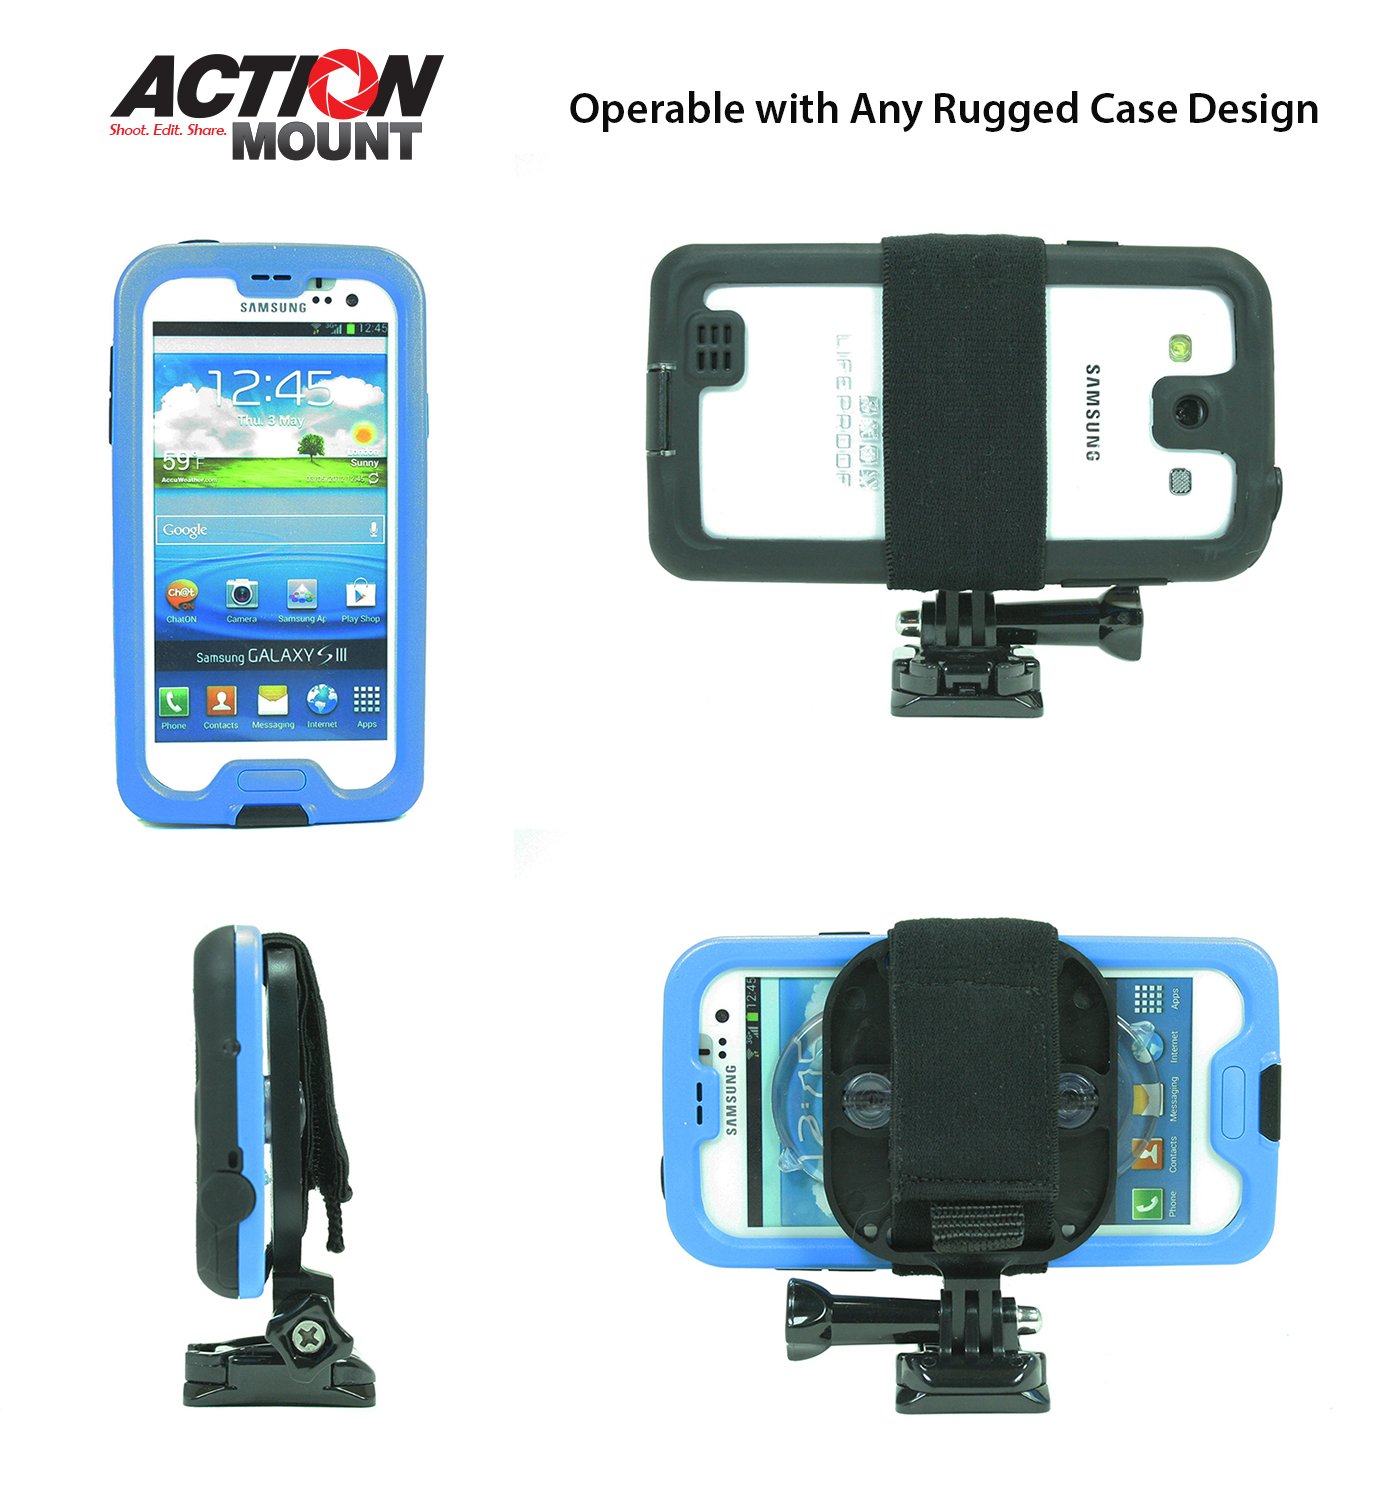 Action Mount Jaws Flex Clamp + Adjustable Goose Neck + Universal Mount Adapter for Smartphone, W/Base Clip & Screw. Use with a Phone, or Gopro Camera. Easy to Use!